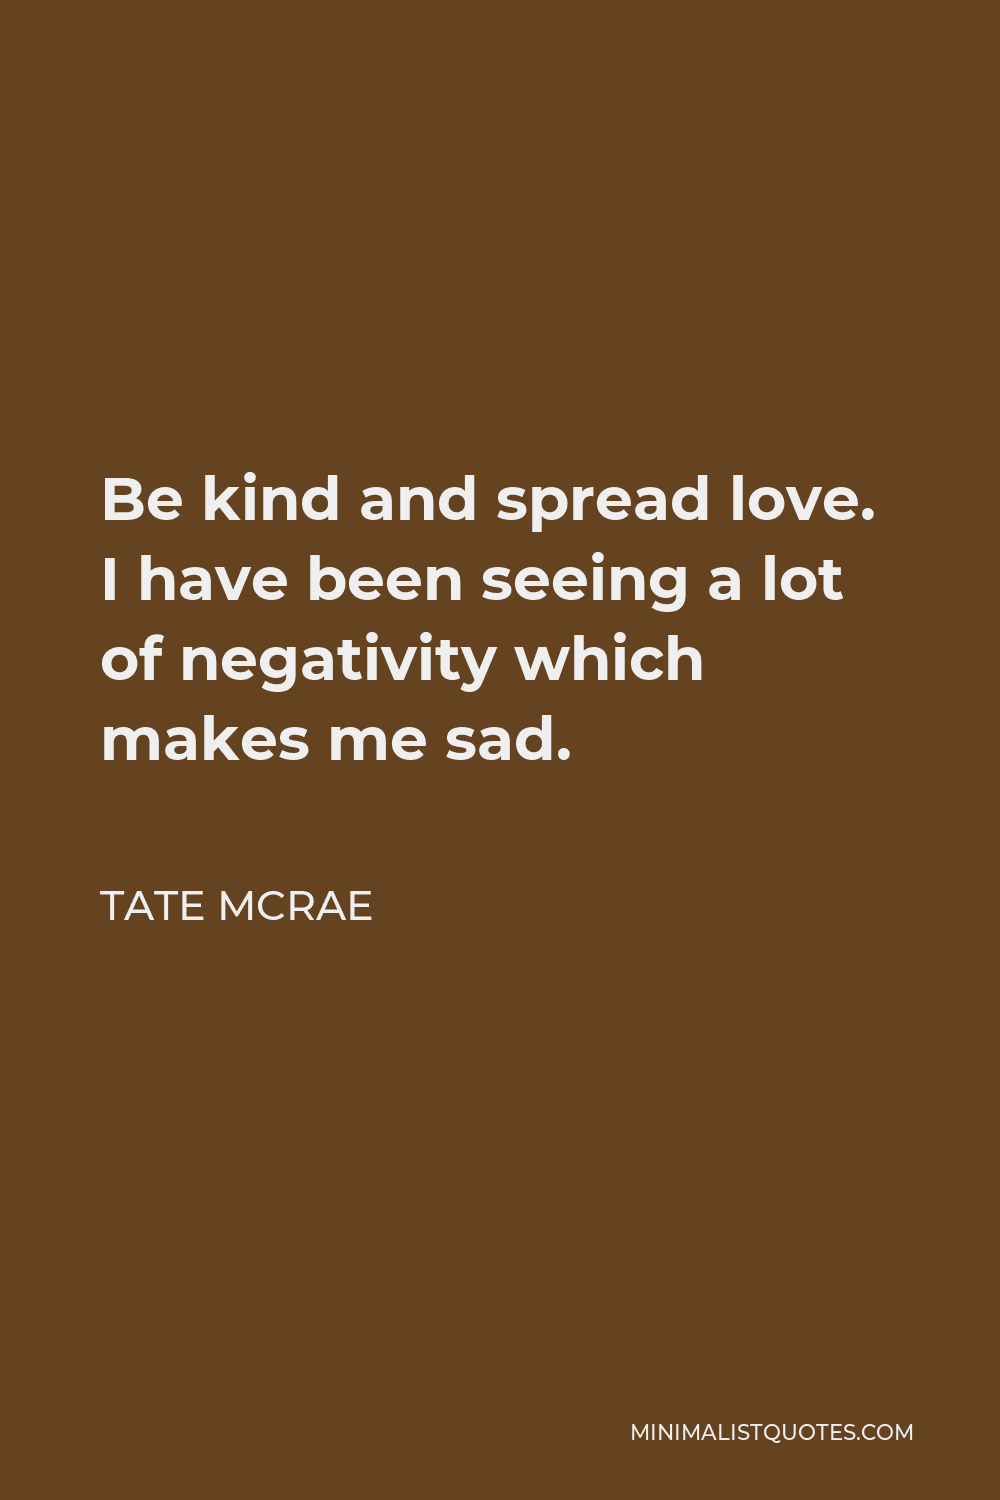 Tate McRae Quote - Be kind and spread love. I have been seeing a lot of negativity which makes me sad.